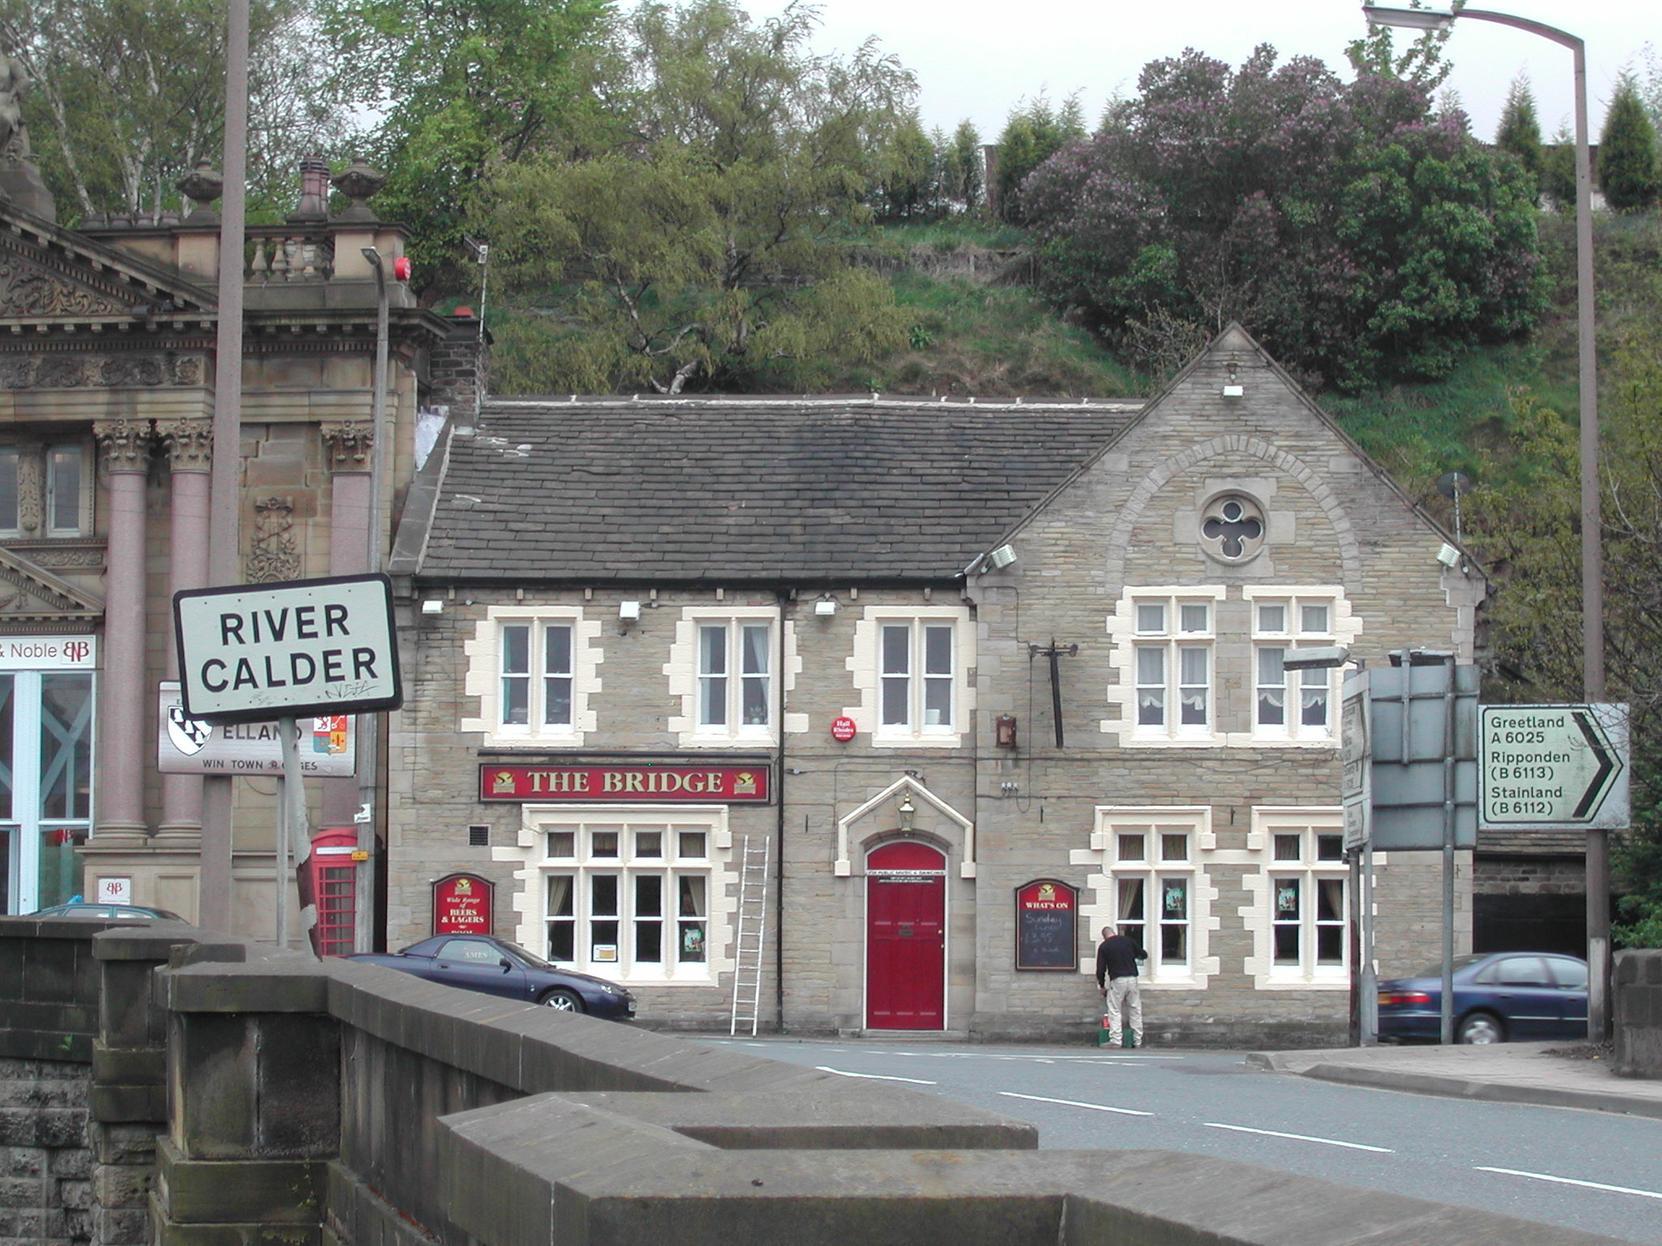 Back in the day The Bridge was located at one end of Elland Bridge. The venue was formerly The Royal Hotel and is now a Wellbeing centre.